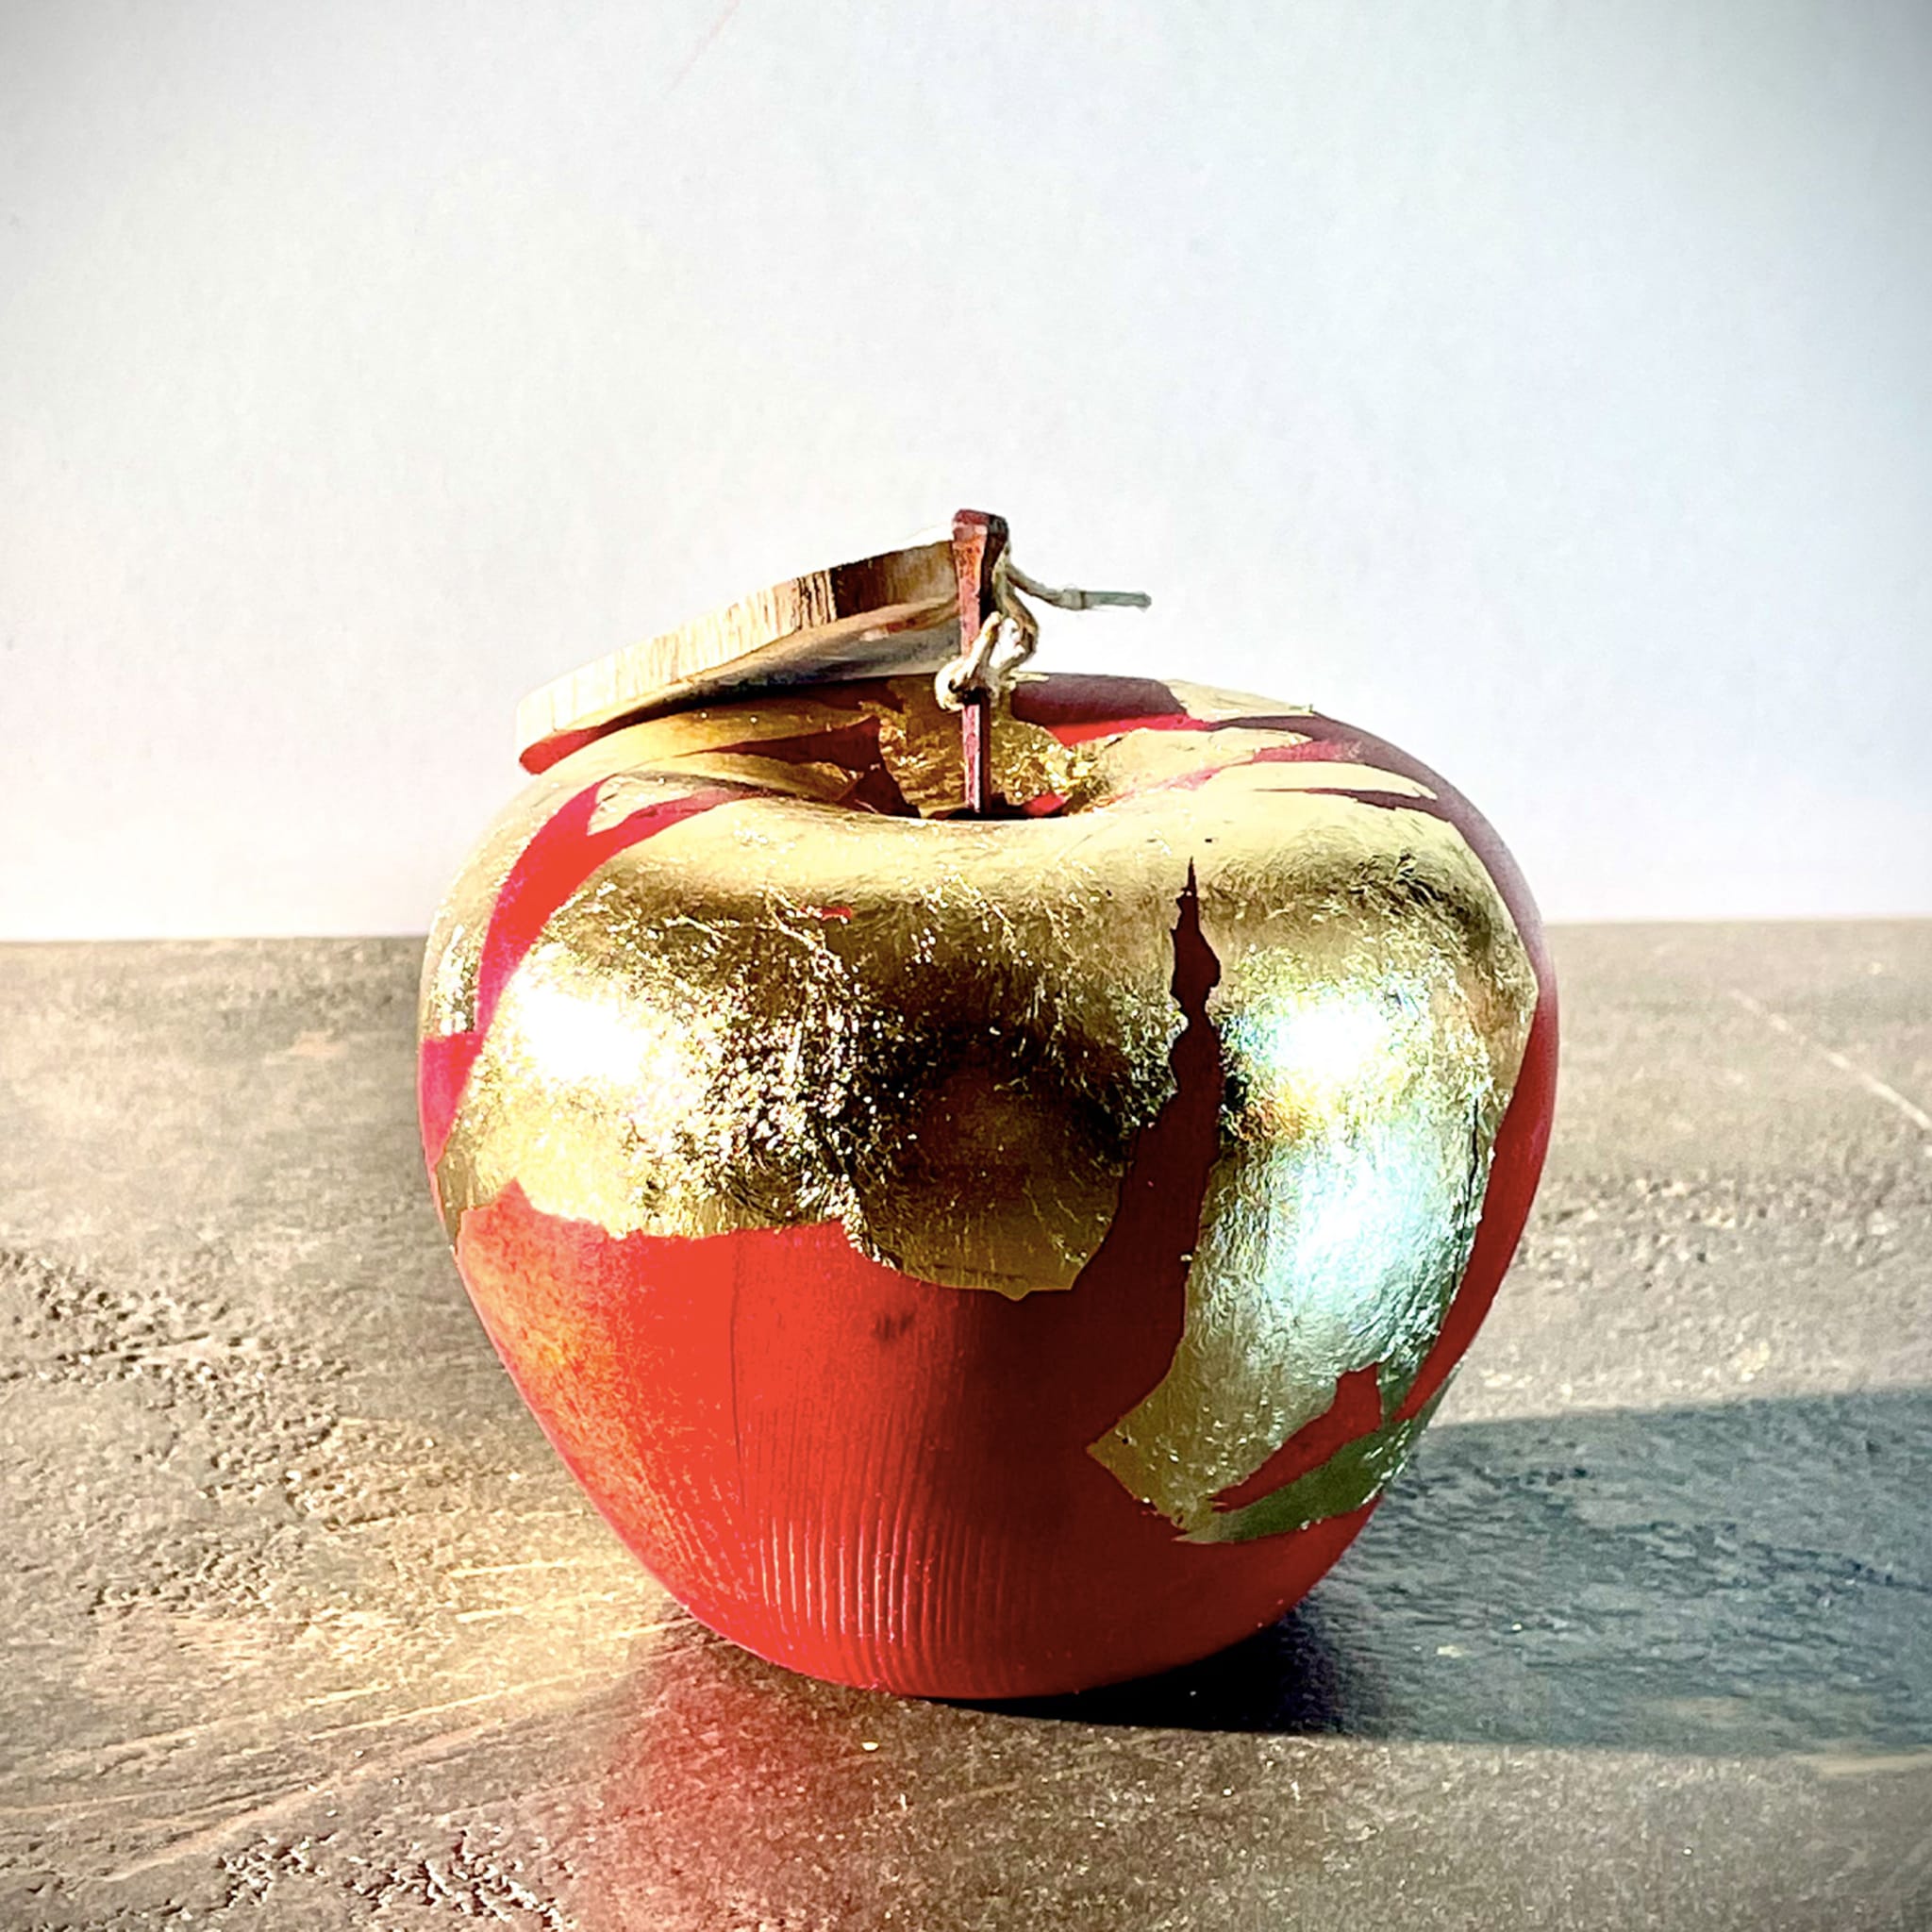 Gold Leaves Red Apple Sculpture - Alternative view 4